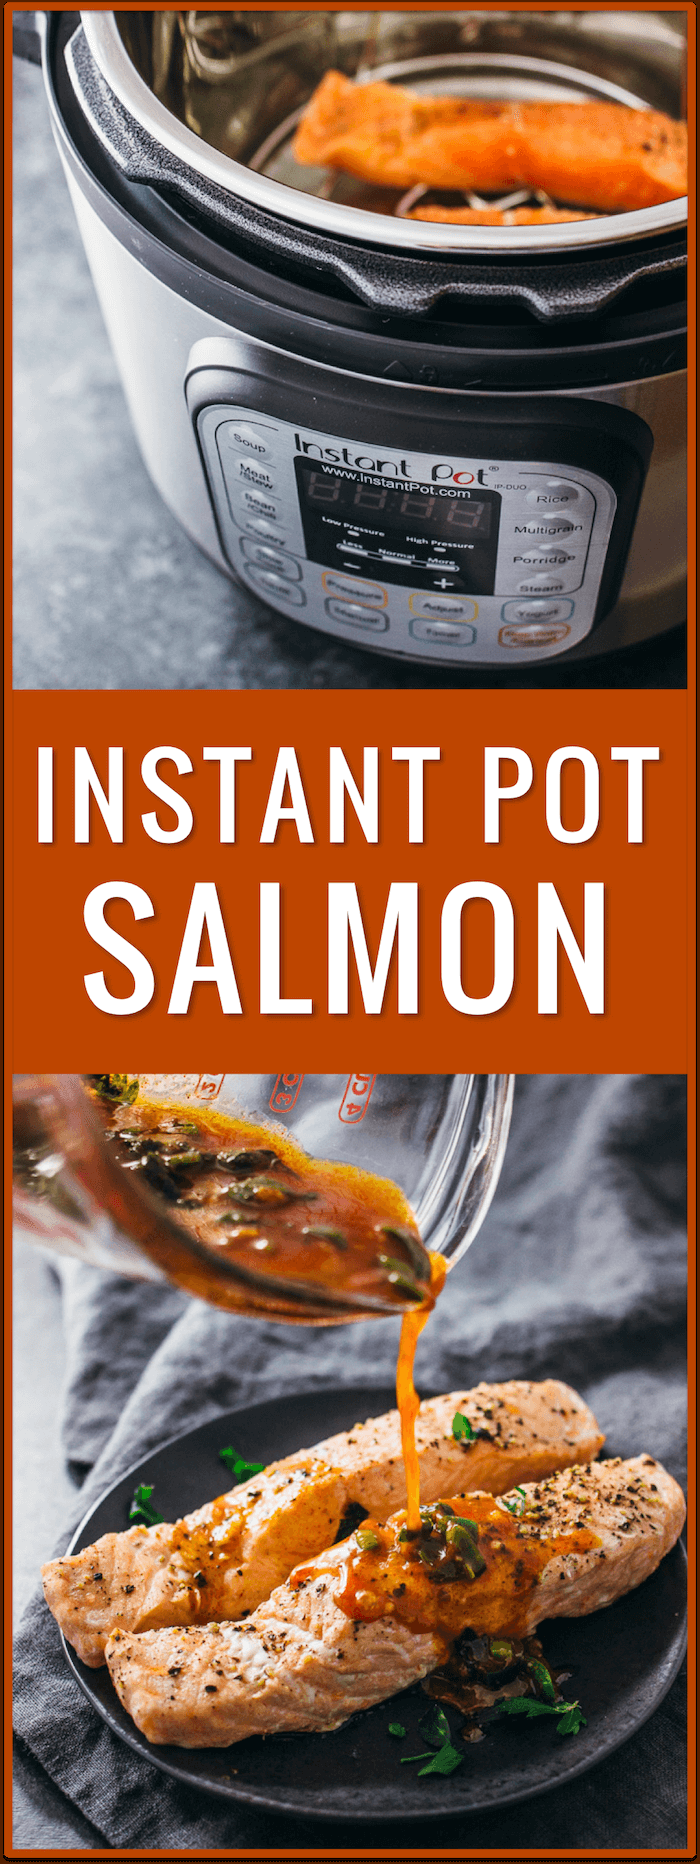 Instant pot salmon with chili-lime sauce -   25 fish recipes catfish
 ideas